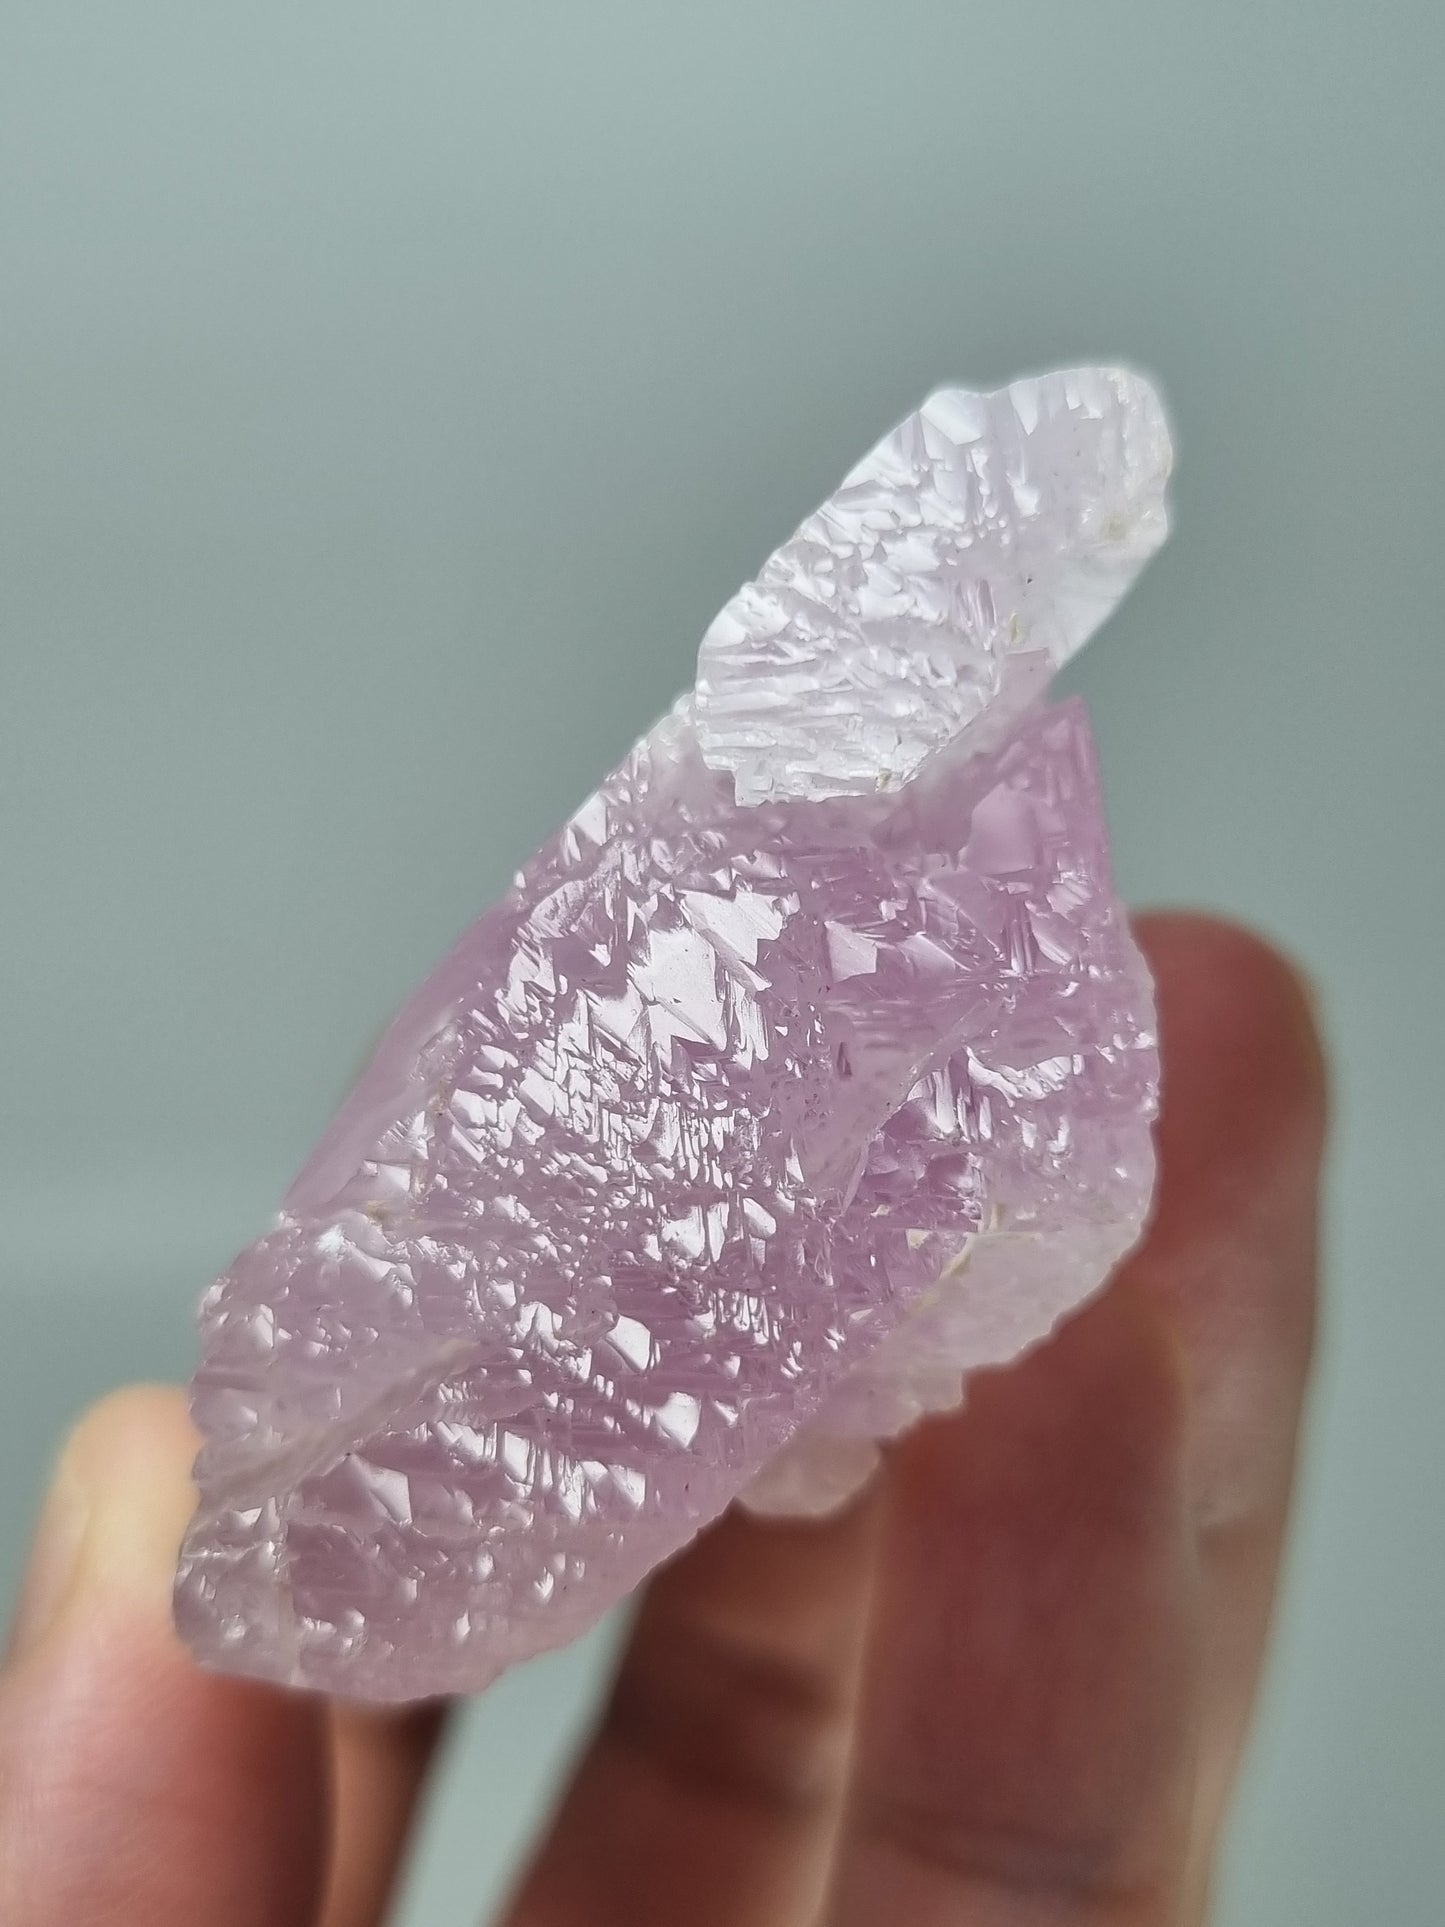 Large Terminated Natural Pink Kunzite Mineral Specimen with rider crystal